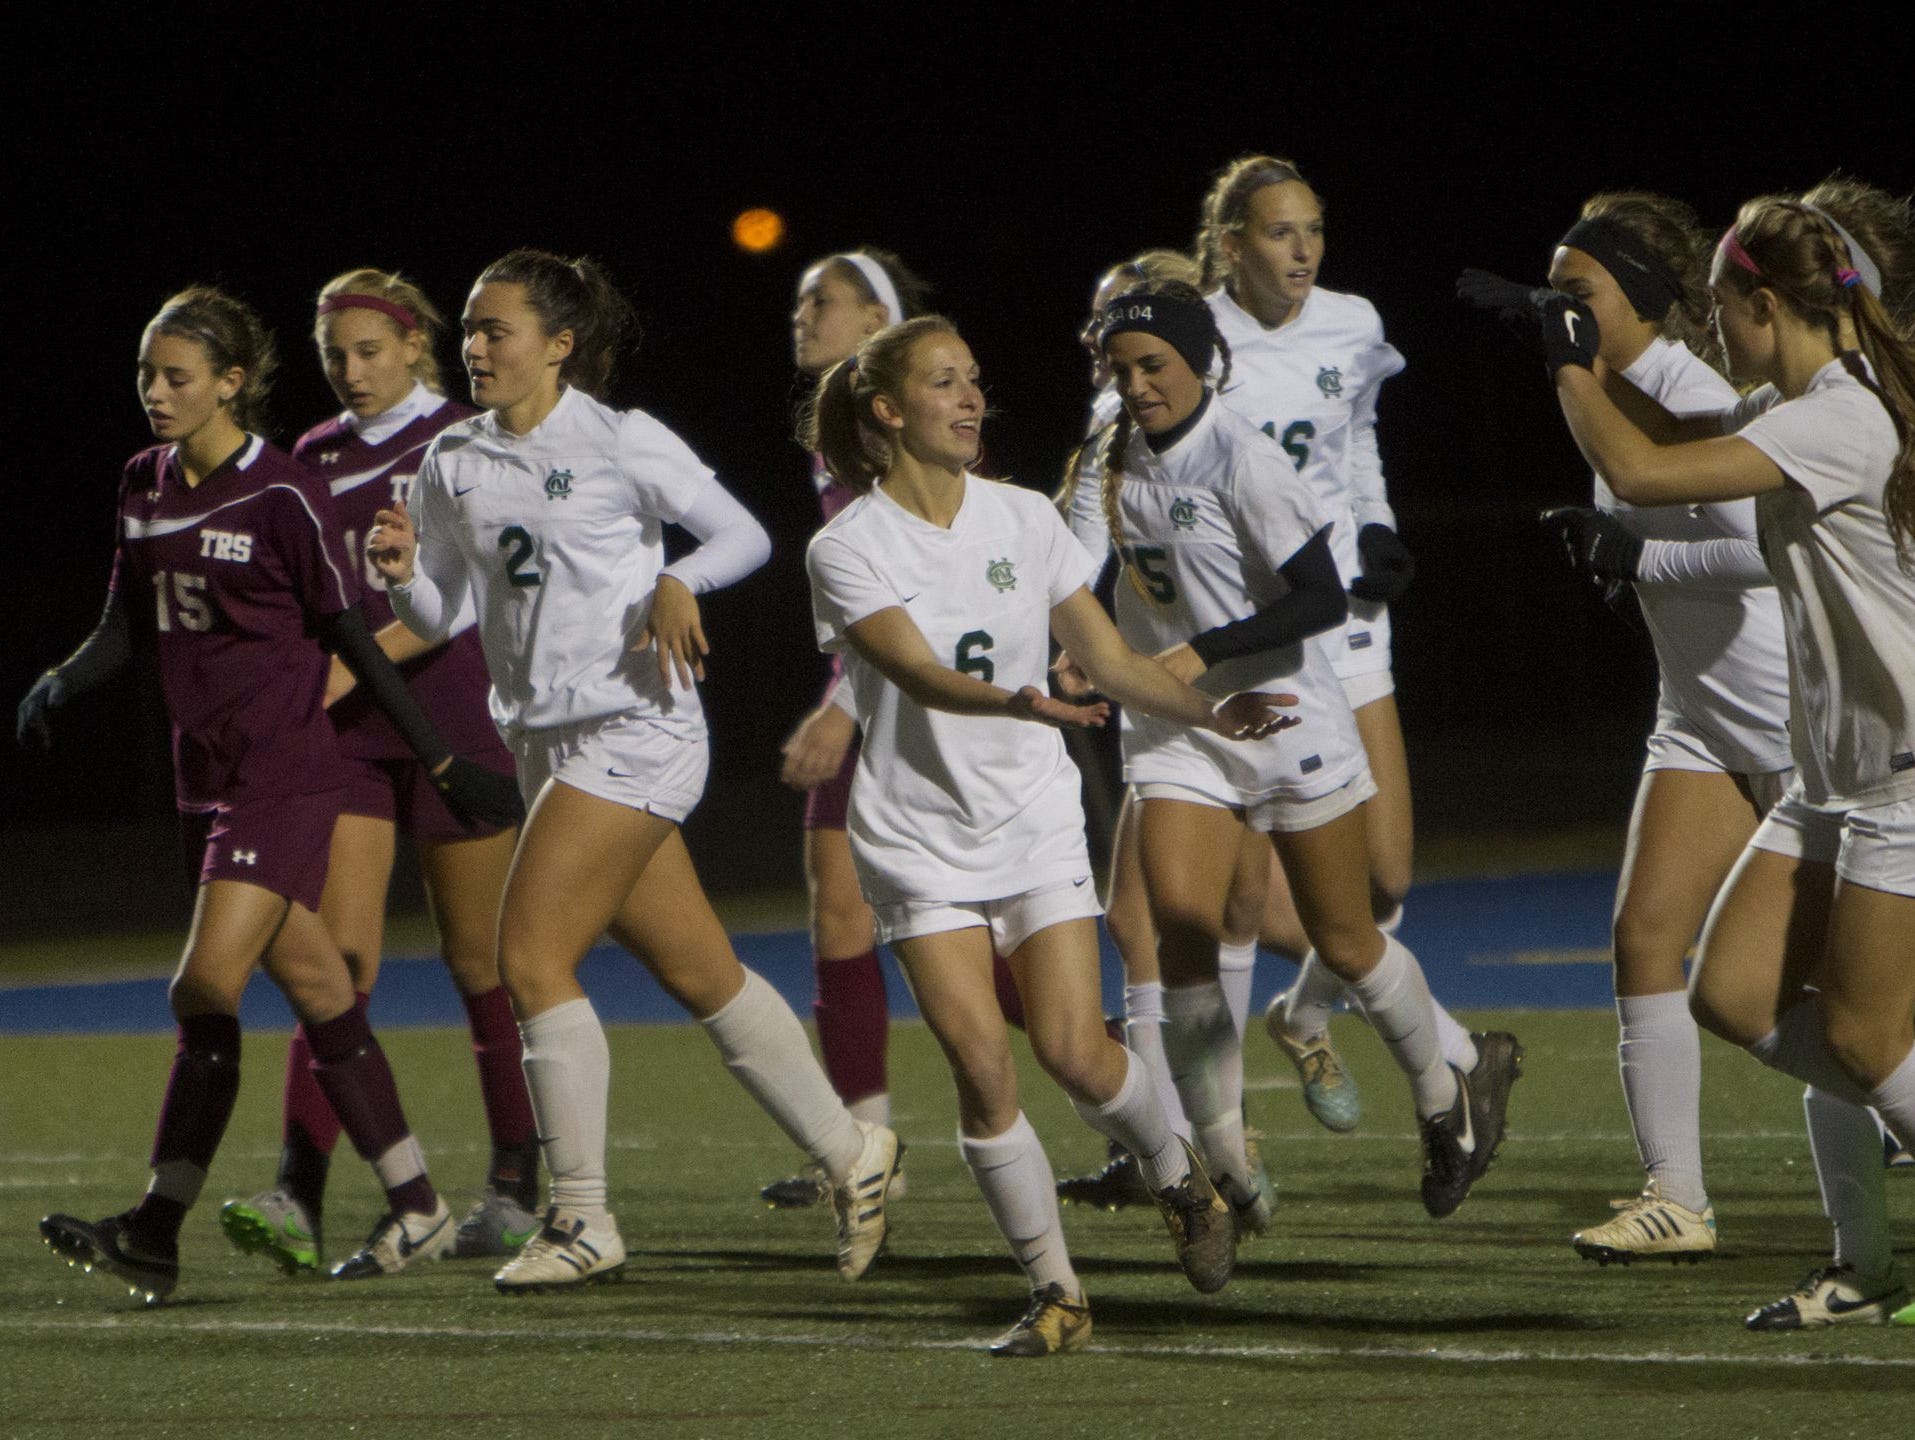 Colts Neck girls soccer played Toms River South in a Group III state semifinal on Nov. 17, 2015